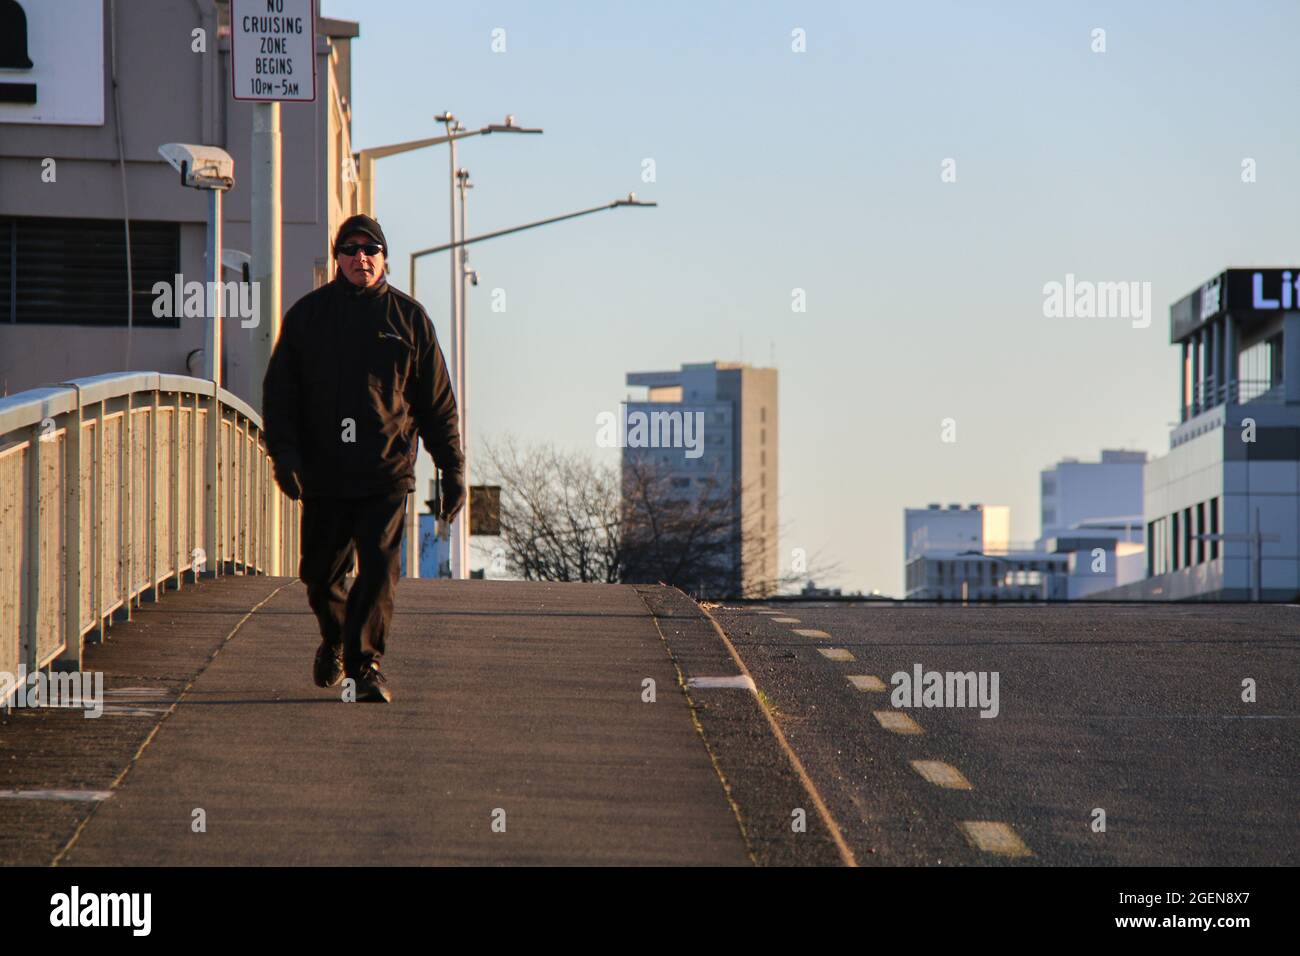 A man gets some early morning exercise on an empty street.New Zealand's outbreak of the Delta variant has so far seen 28 confirmed cases in Auckland, and three in Wellington. Prime Minister Jacinda Ardern yesterday placed areas outside Auckland and Coromandel into a further lockdown until 11.59 pm on Tuesday. Deputy Prime Minister Grant Robertson said this morning, “things will get worse before they get better”, and that “there will be more cases”. He said he hadn't yet had the update on today's numbers, but that information would be given at the 1 PM NZ time, press conference. More than 40, 0 Stock Photo